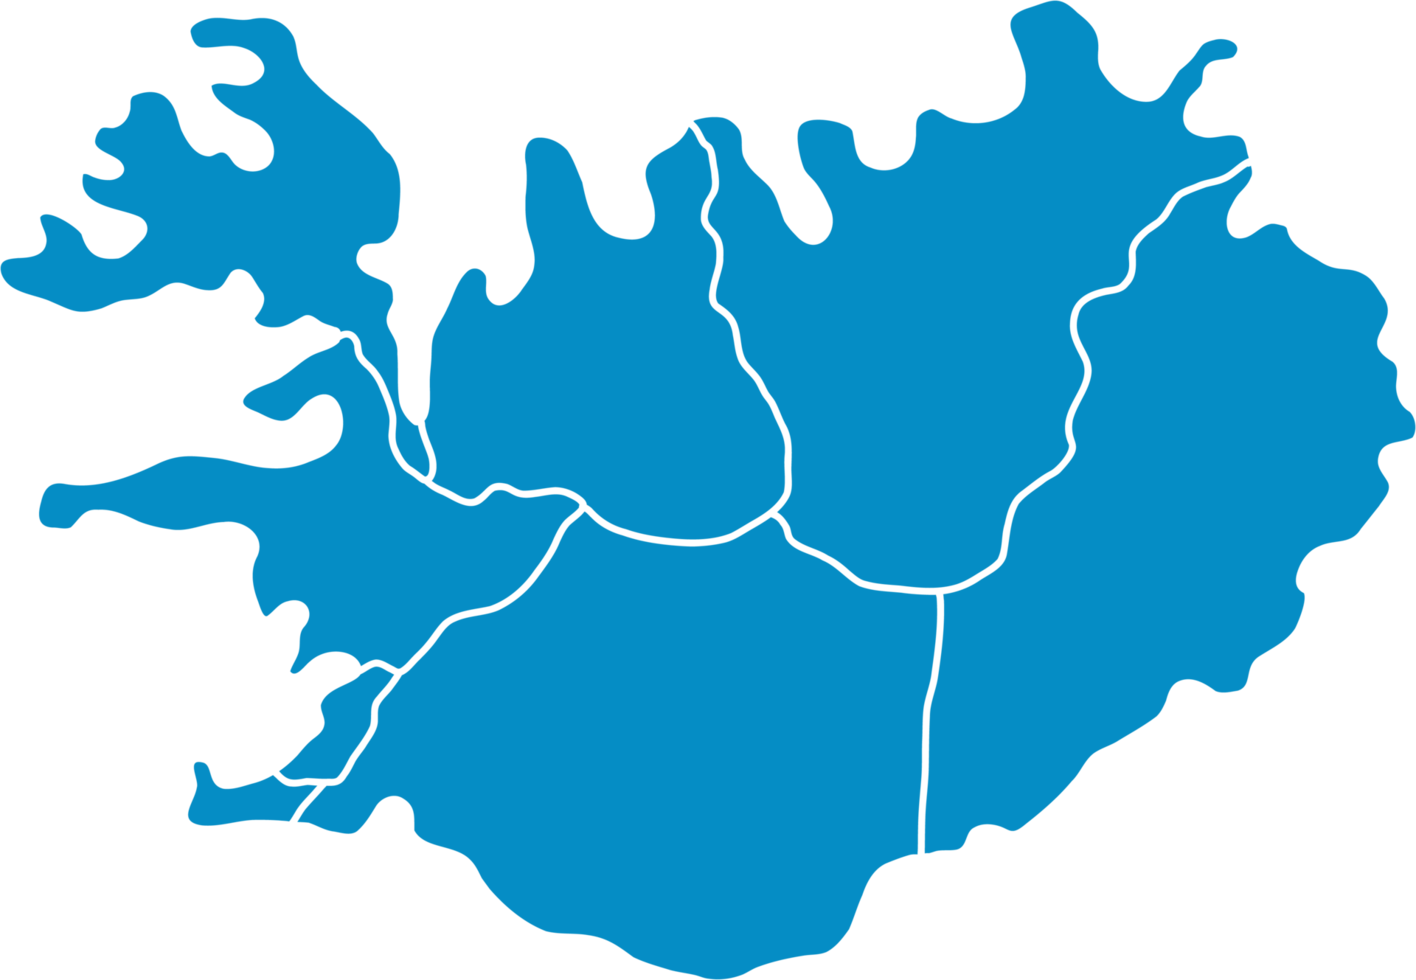 doodle freehand drawing of iceland map. png